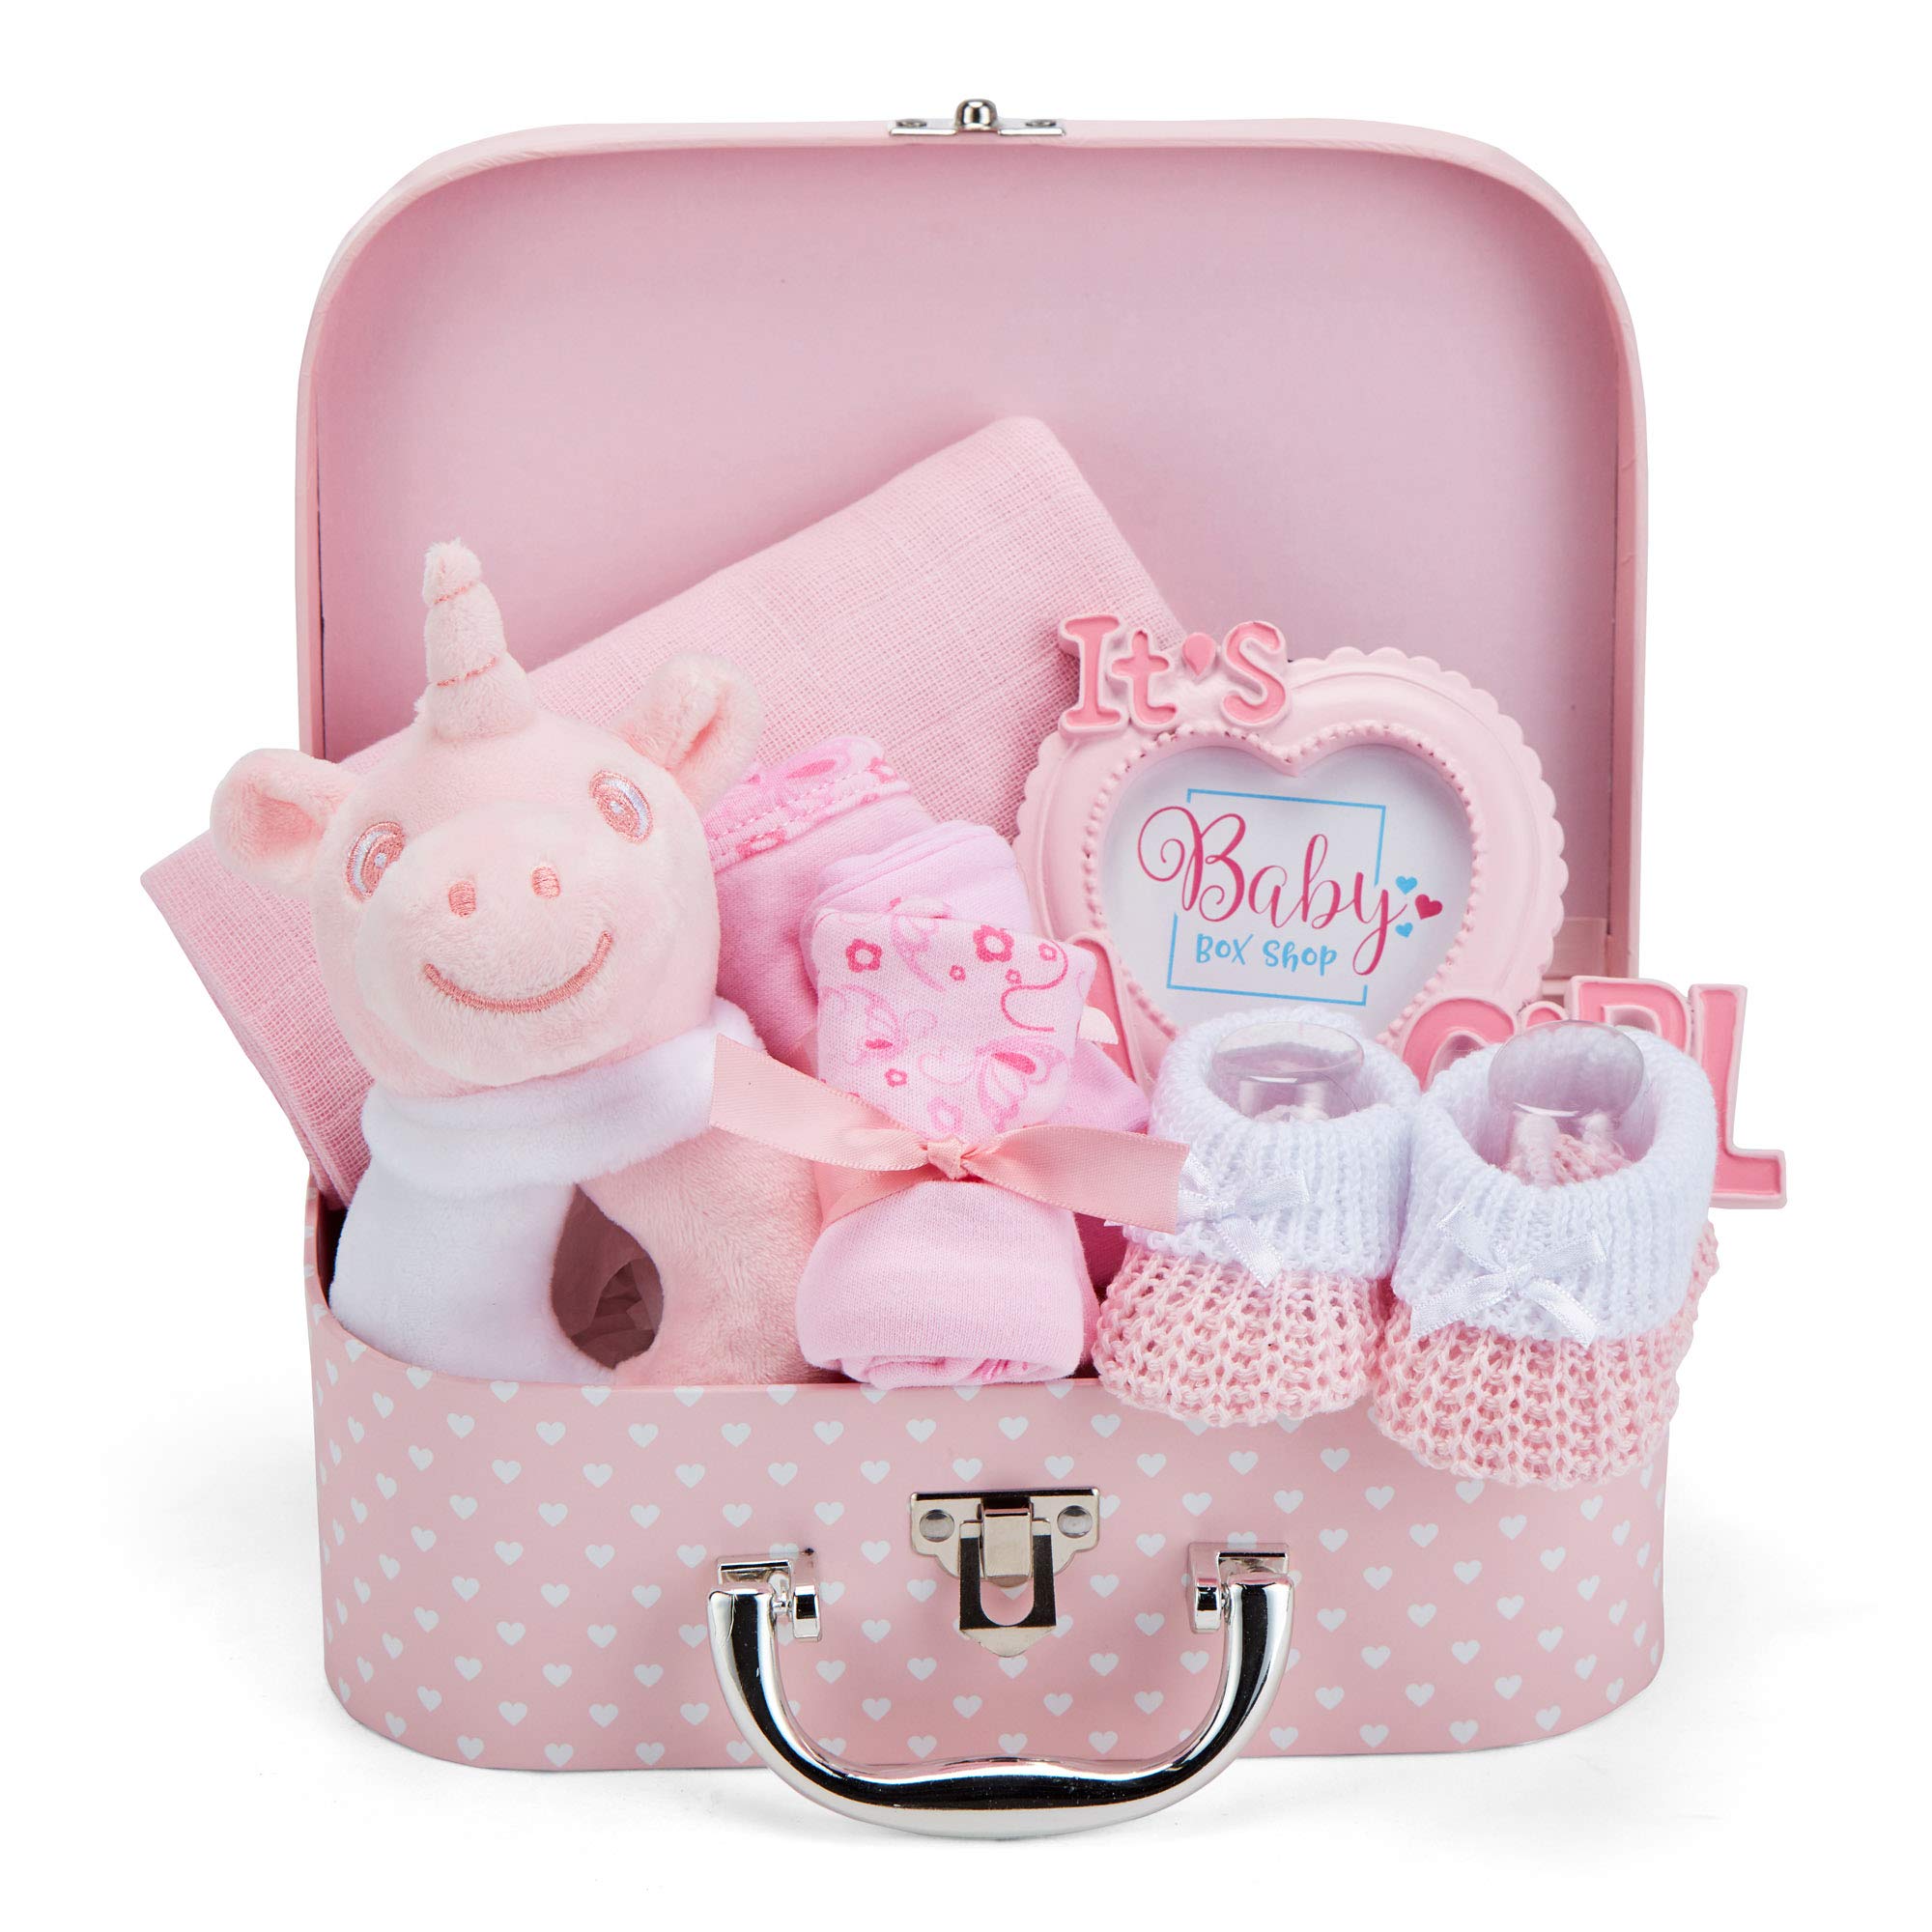 Newborn Baby Girl Gift Set - Hand Packed into Small Pink Hamper Keepsake Box Styled as a Case Includes Soft Toy Rattle, Photo Frame, Muslin Cloth, Bib, Socks, Mitt and Hat for New Mother Baby Showers